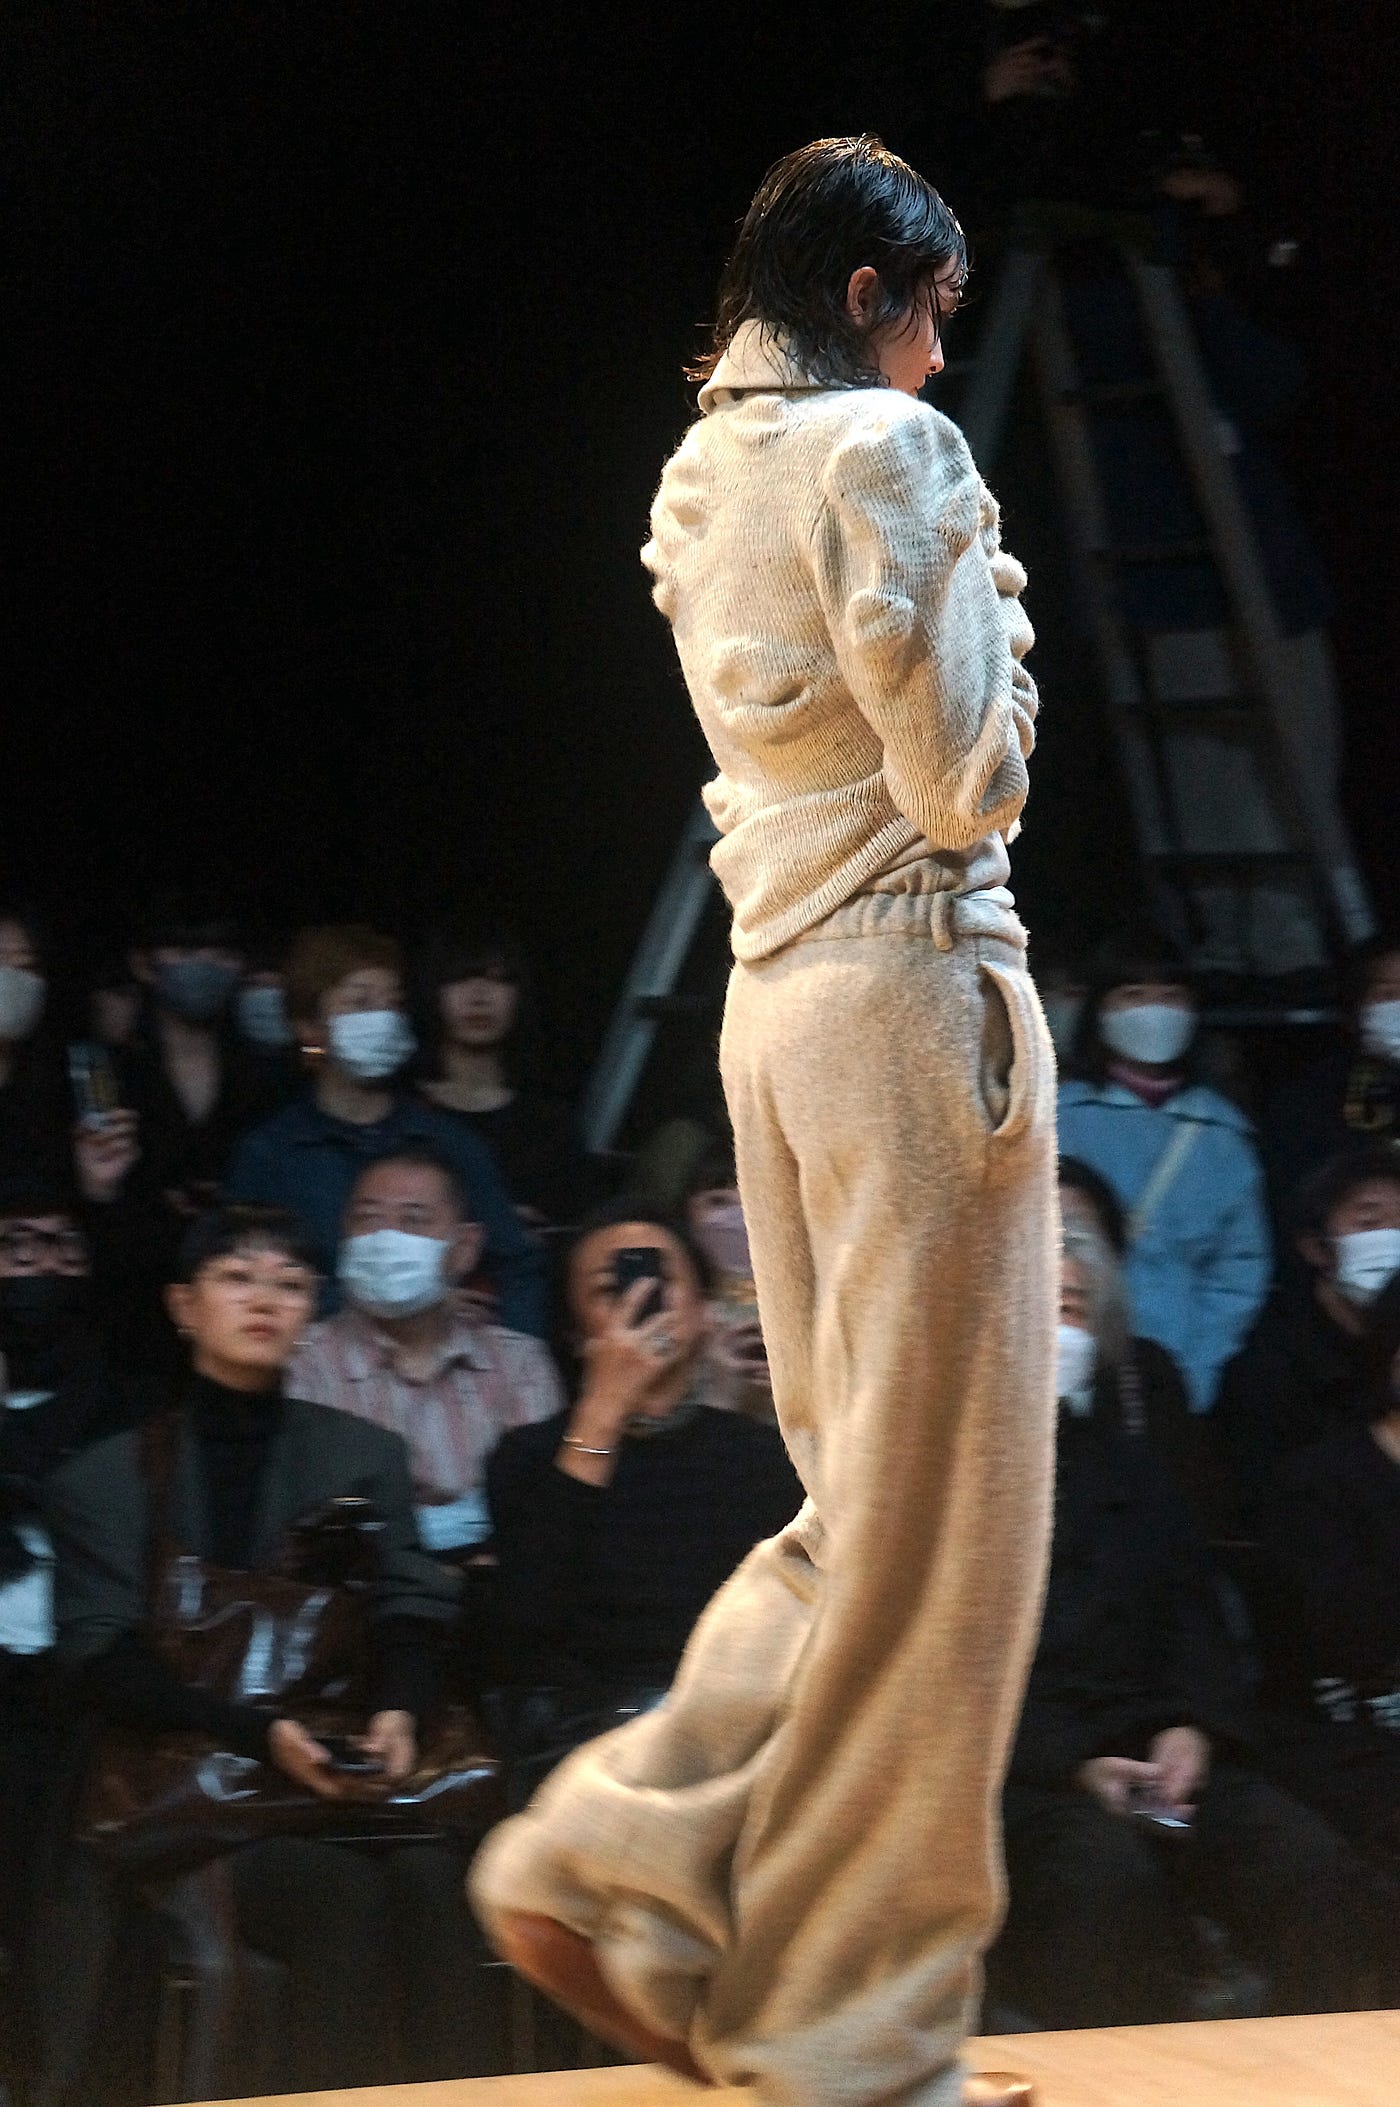 Pillings by Ryota Murakami. Notes from the A/W '23 runway show in